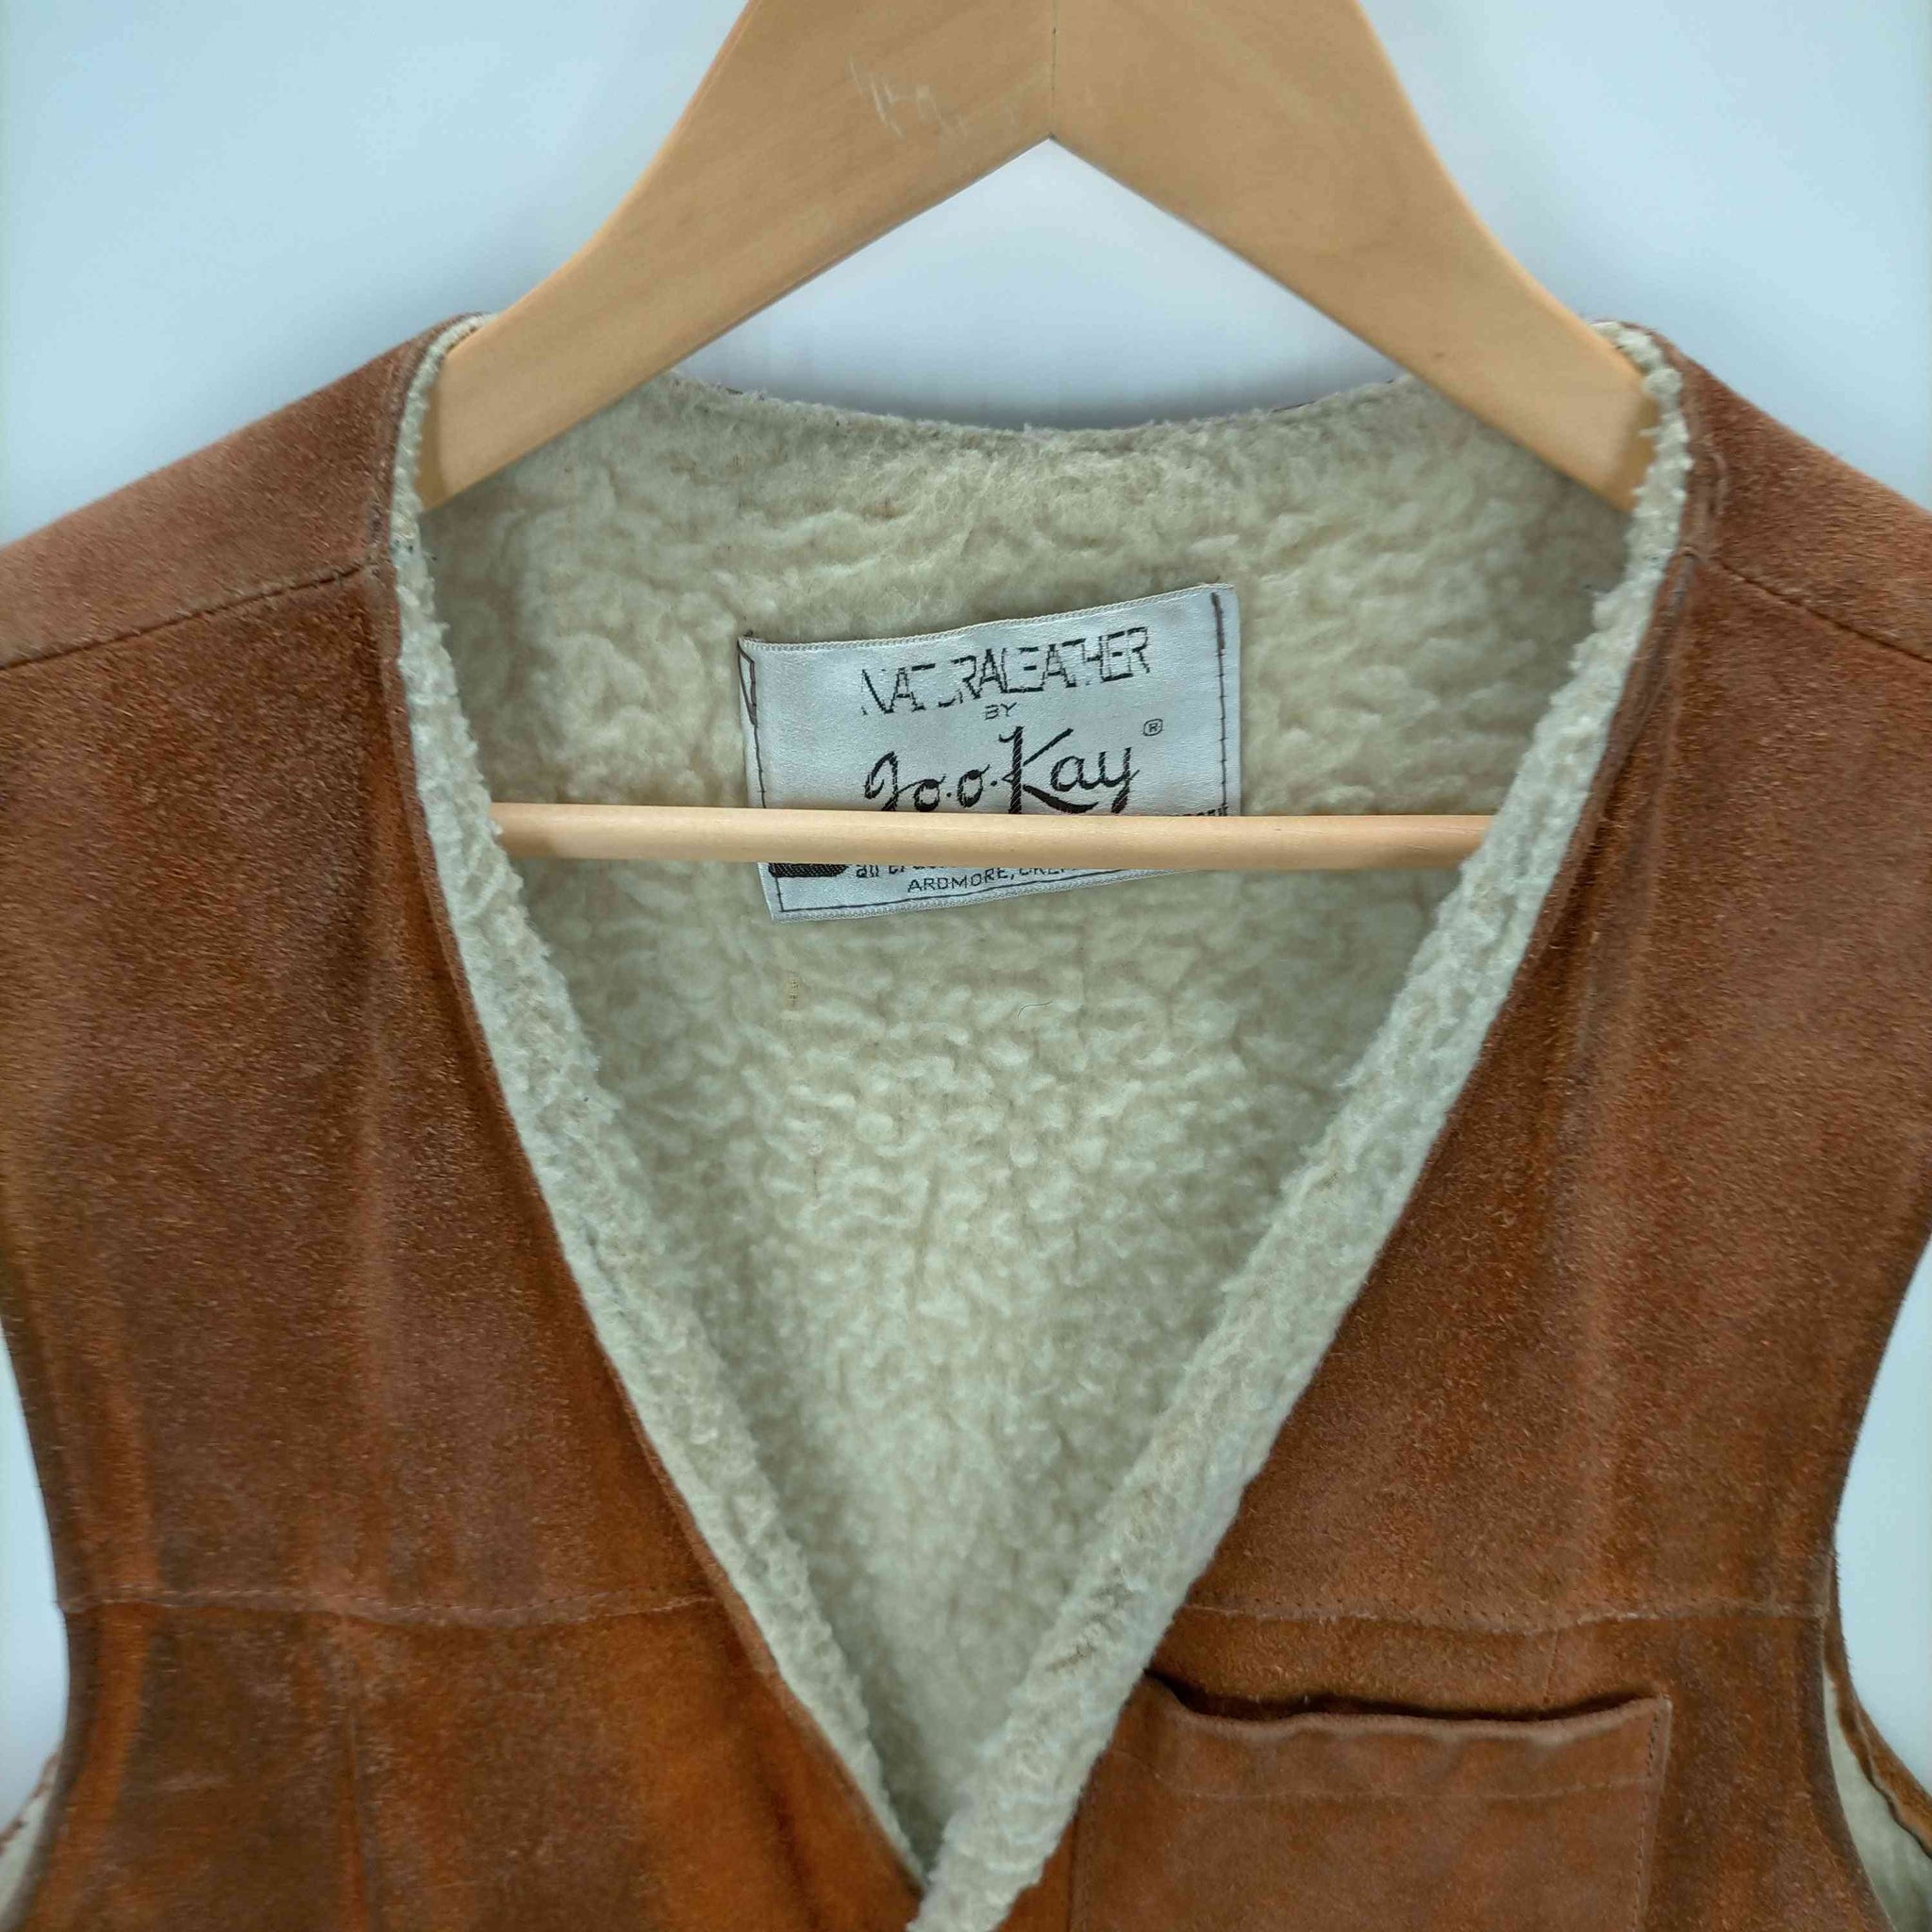 USED古着(ユーズドフルギ){{NATURAL LEATHER BY JOO KAY}} 70s スエードボアベスト